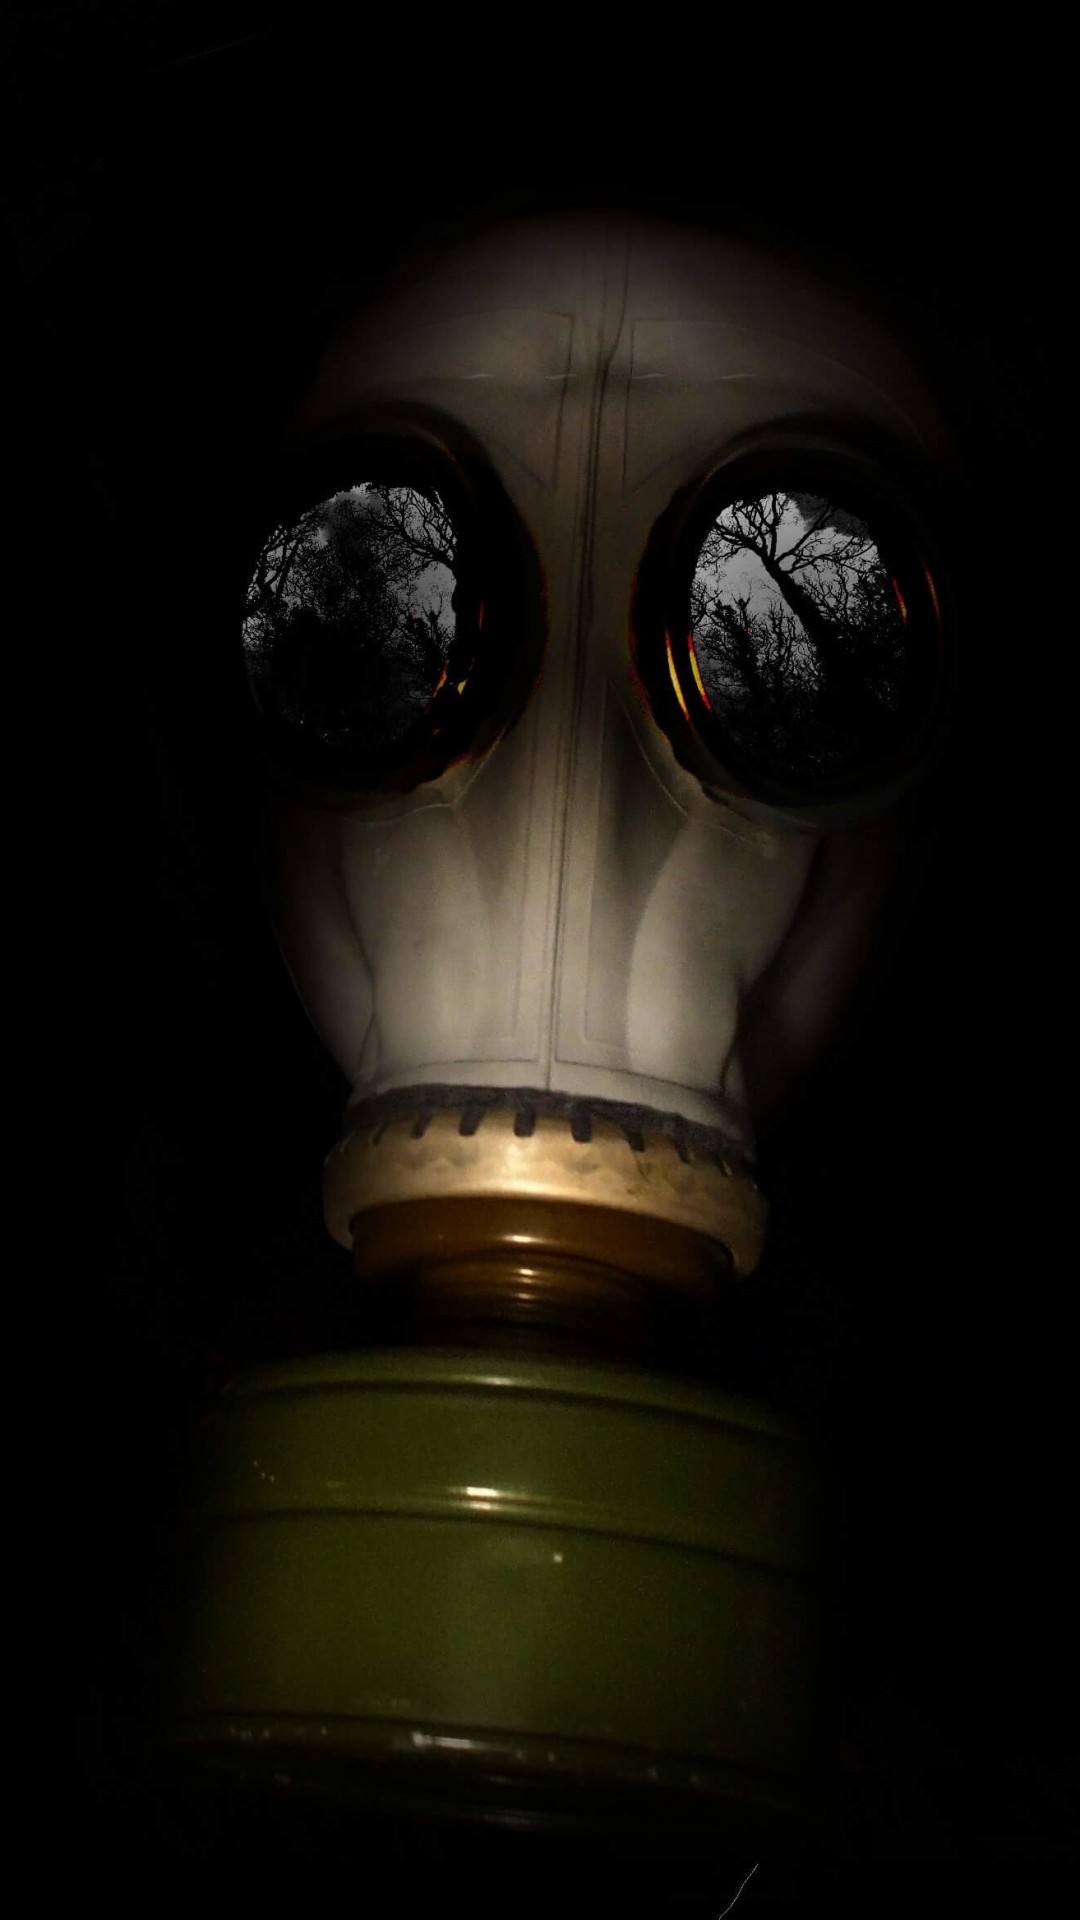 WWII Gas Mask Wallpaper for SAMSUNG Galaxy S4